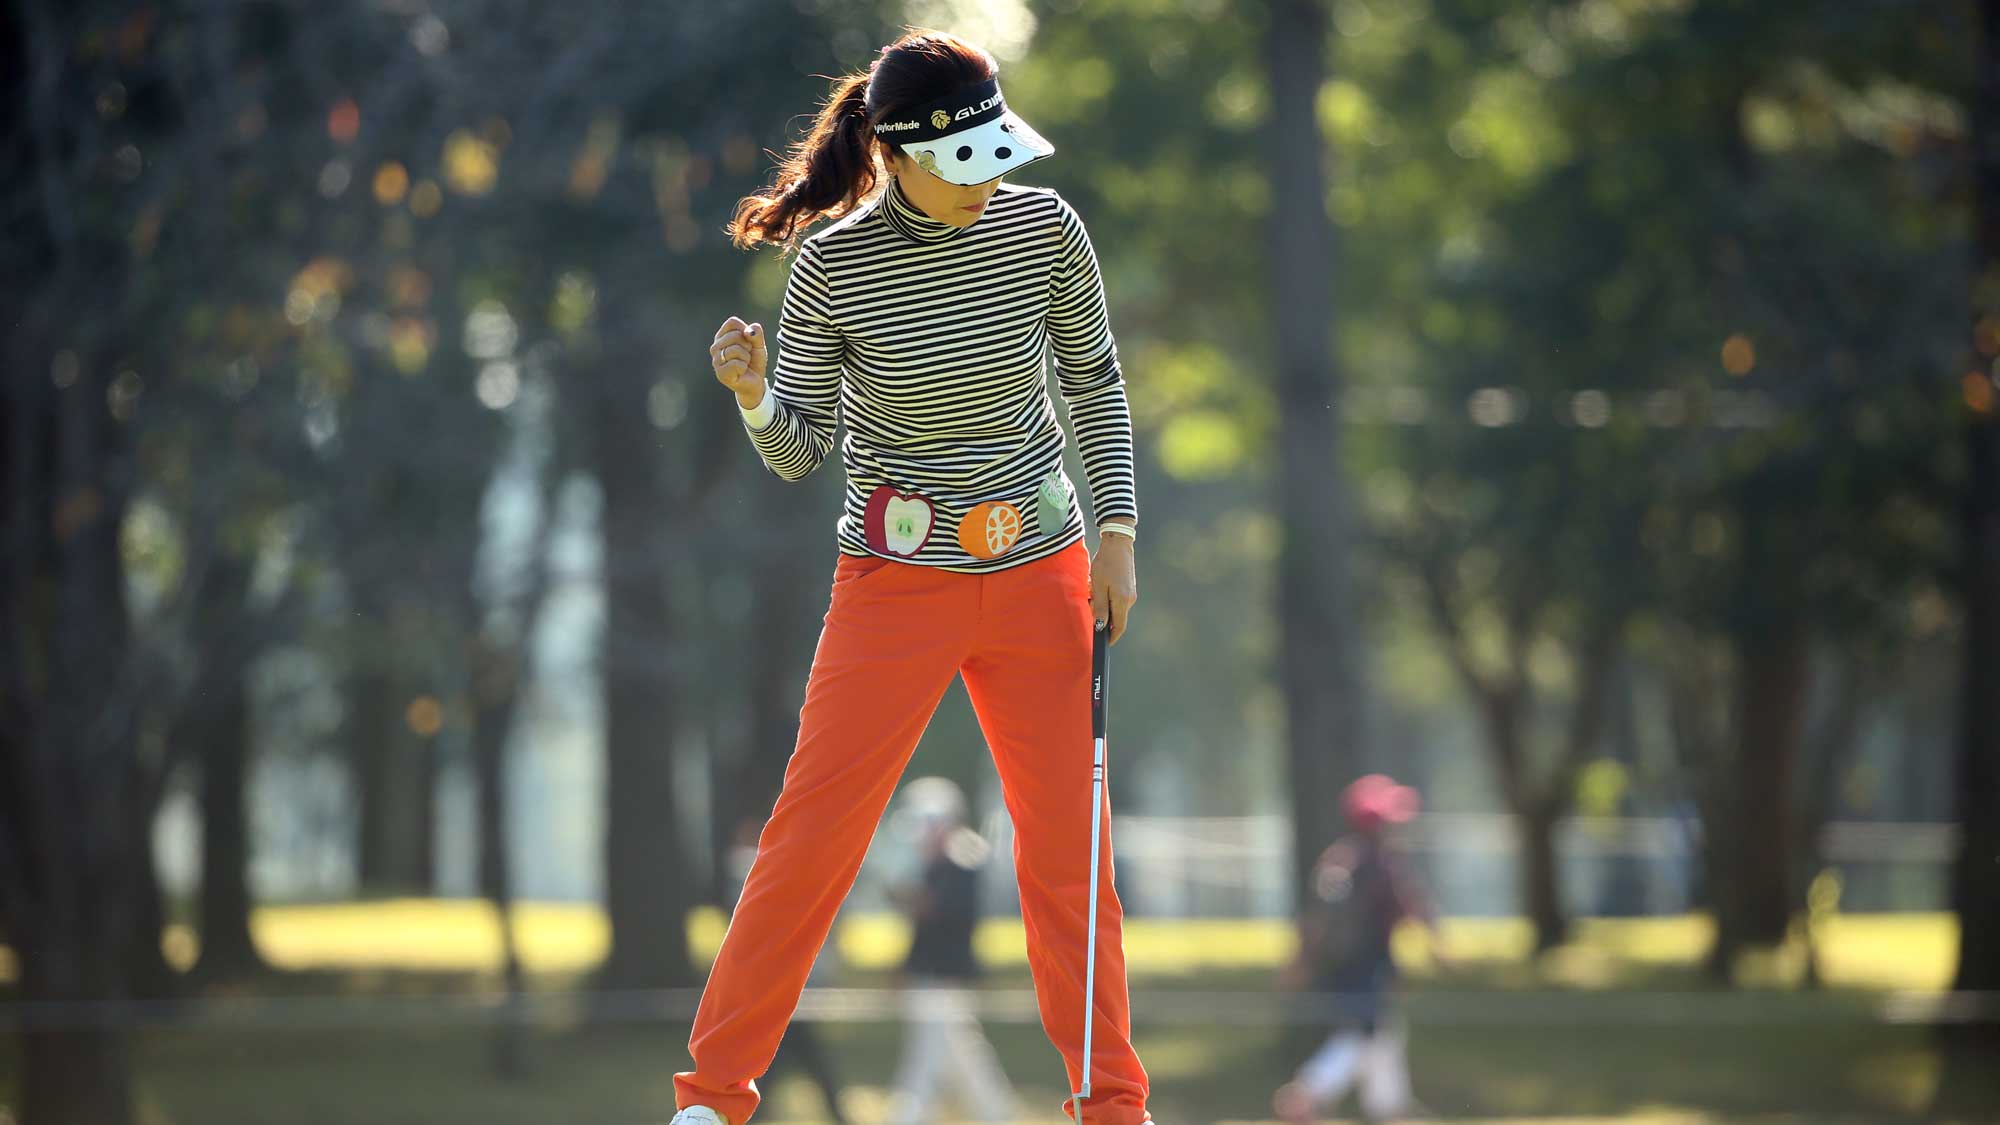 Soo-Yun Kang of South Korea celebrates after making her birdie putt on the 9th hole during the second round of the TOTO Japan Classic